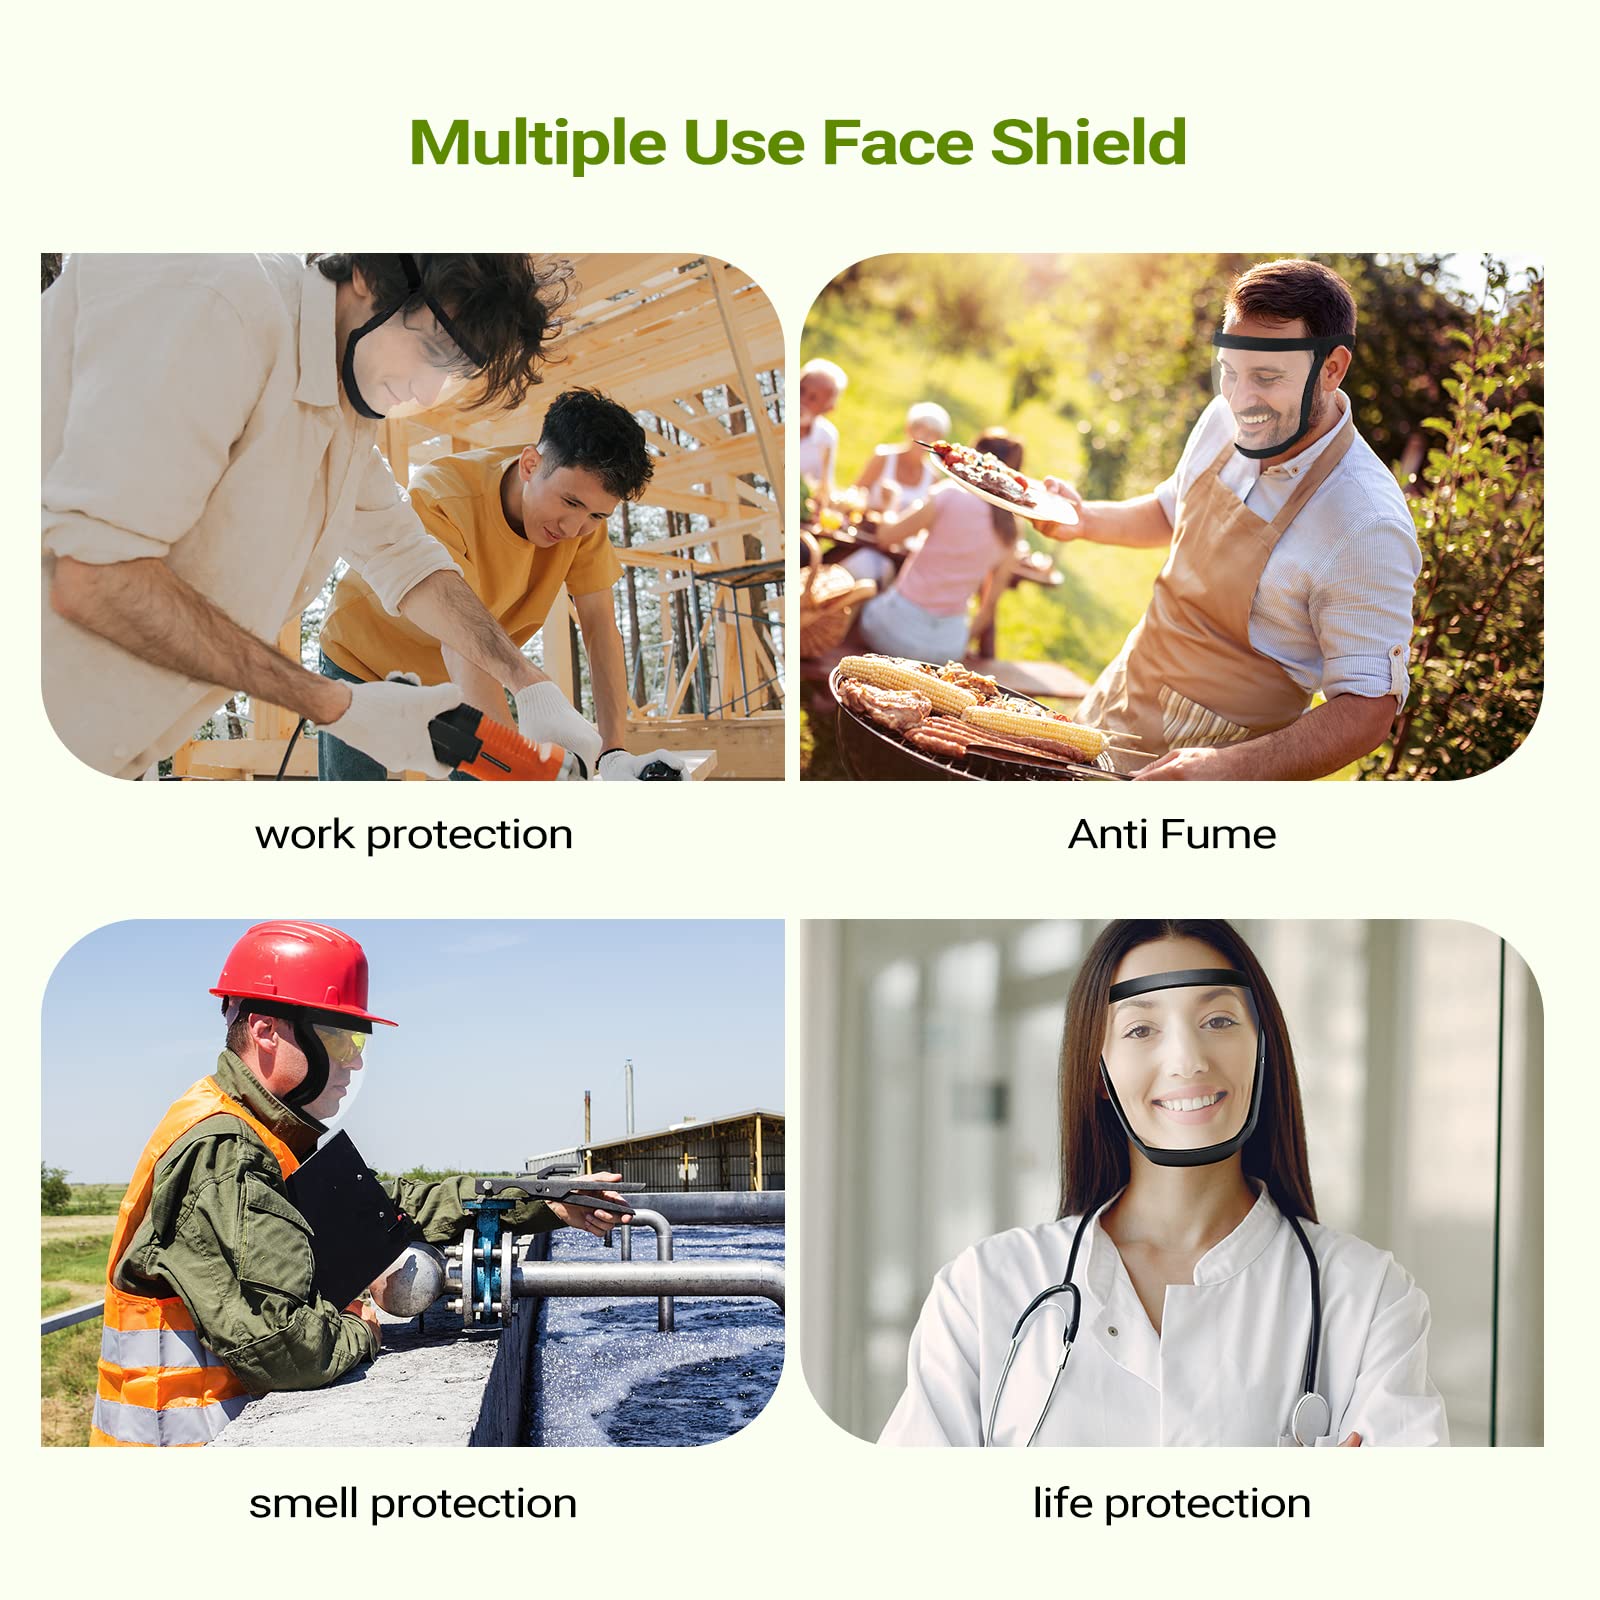 TRIrunpdl 2 Pack Clear Full Safety Face Shield for Adults Women Men, Adjustable & Reusable Super Protective Face Shields with Super Lightweight, High-Definition, Anti-Fog Red